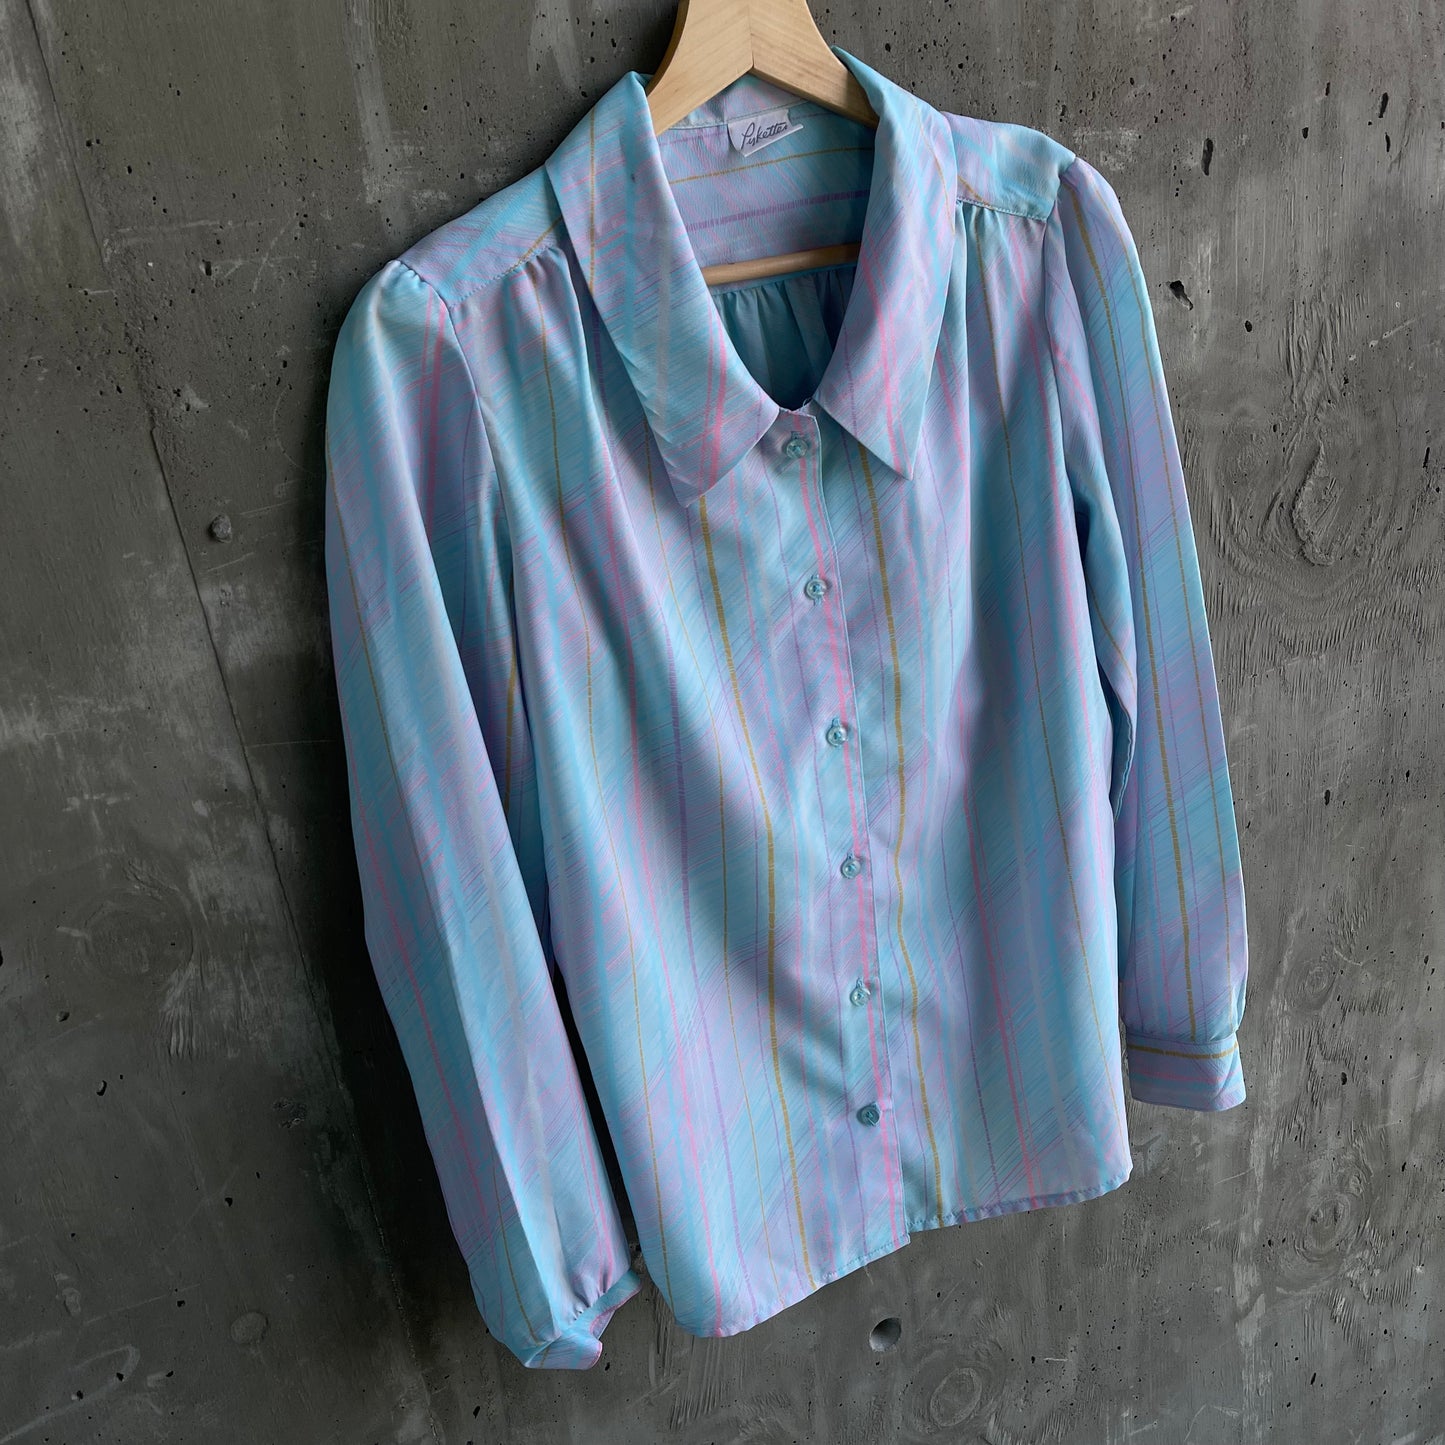 Vintage Pykettes Blouse Pastel Print from 80’s